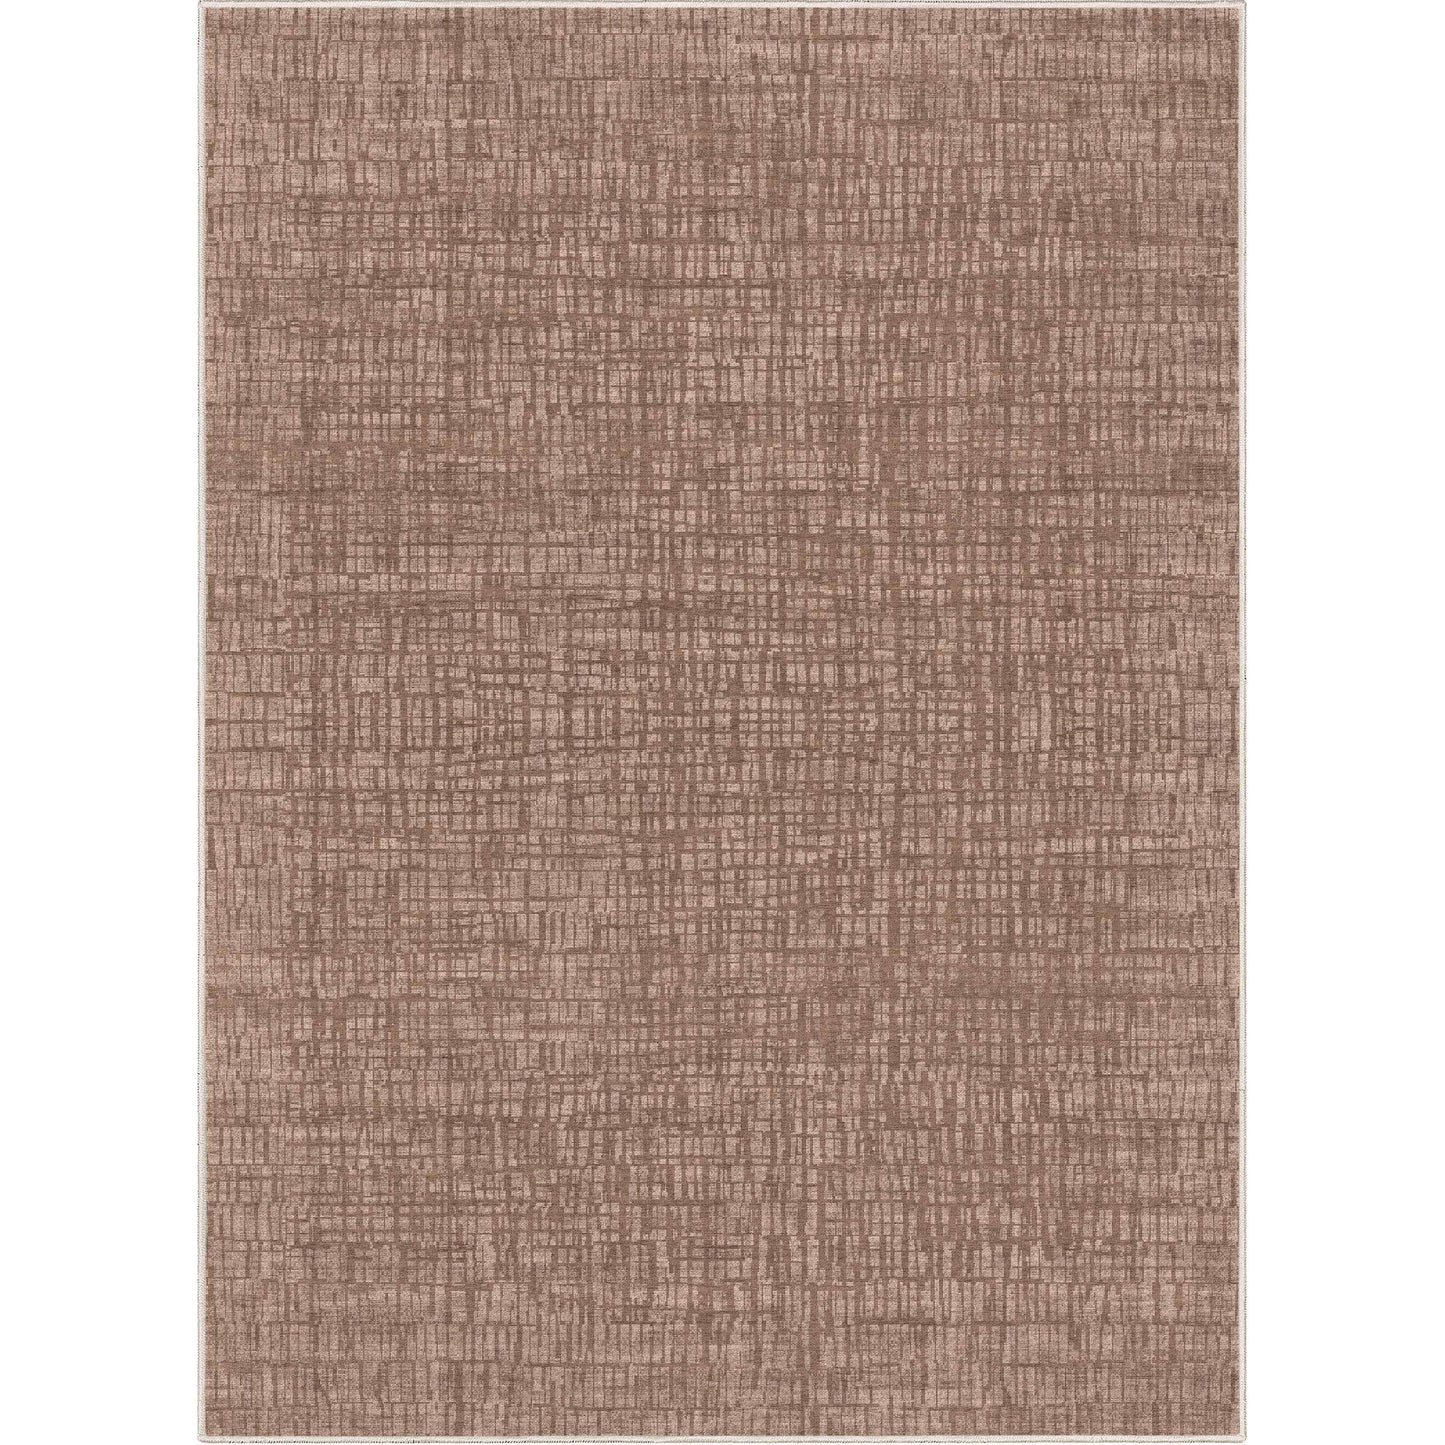 Abstract Nightscape Brown Rug W-AB-39F